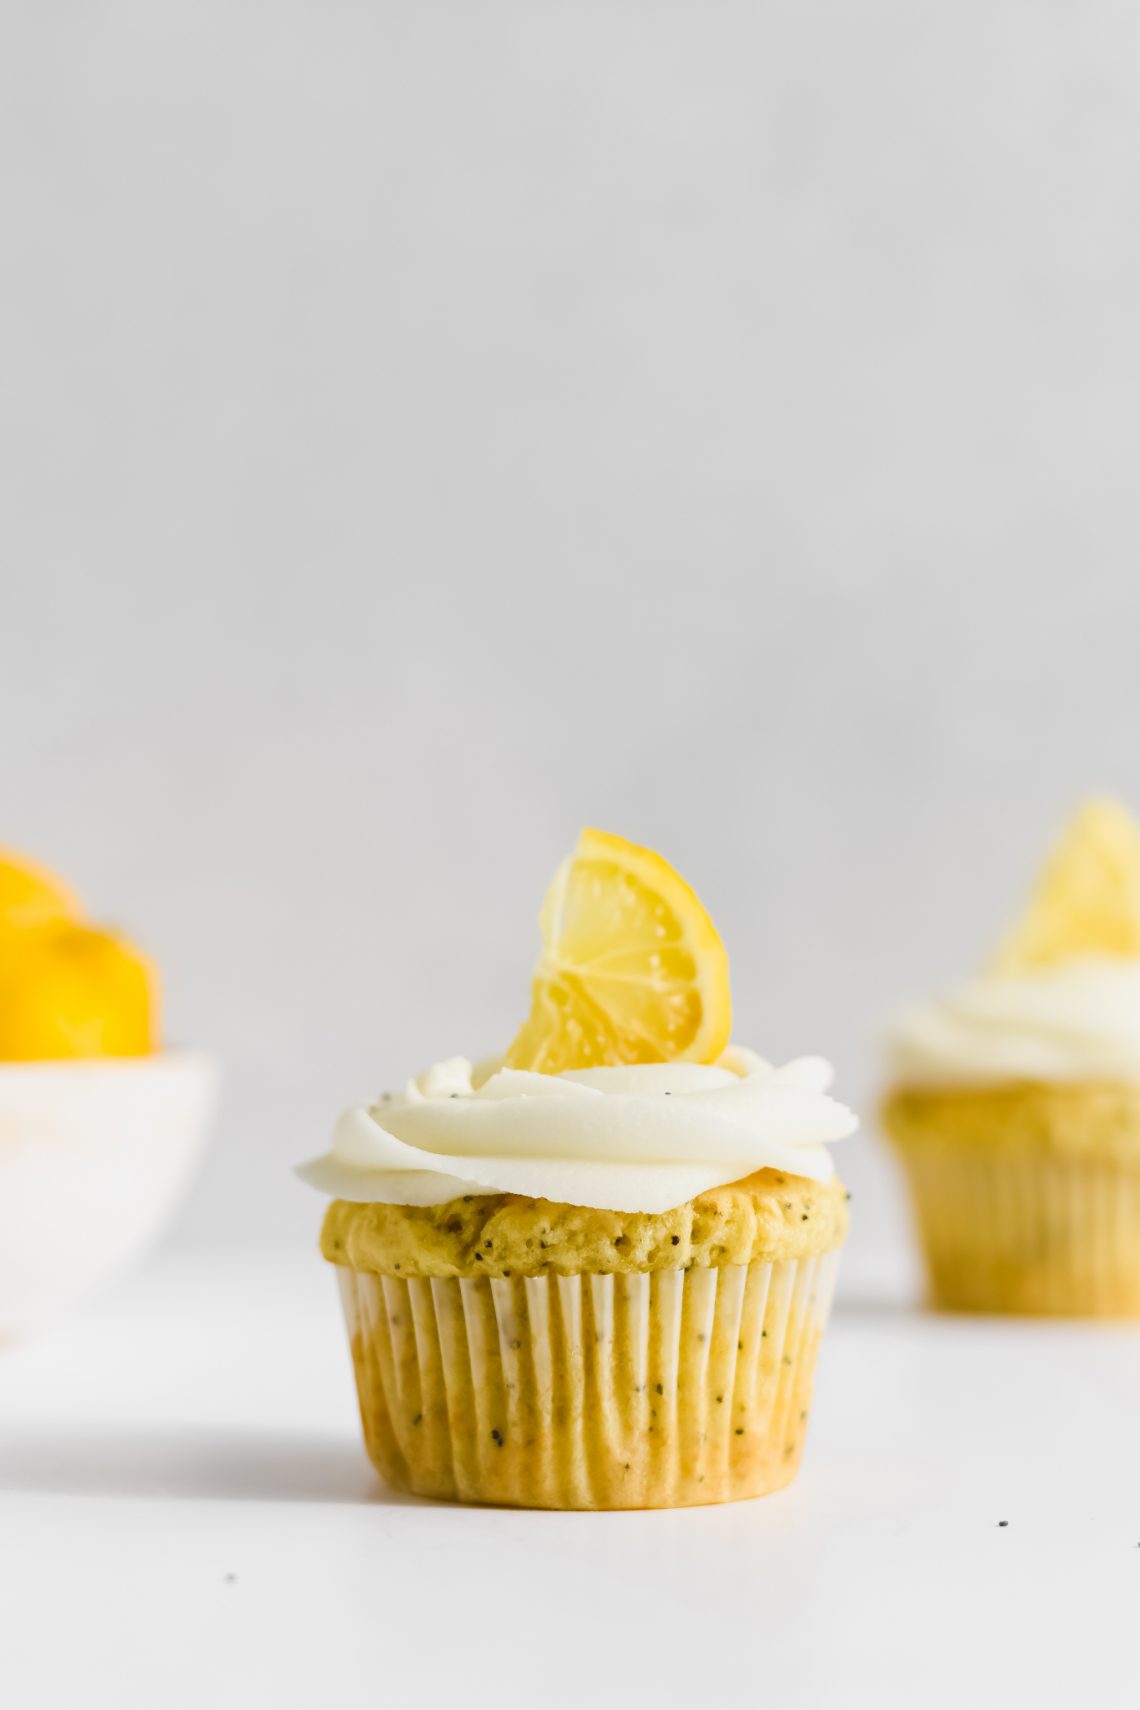 Lemon and Poppy Seed Muffins with Frosting